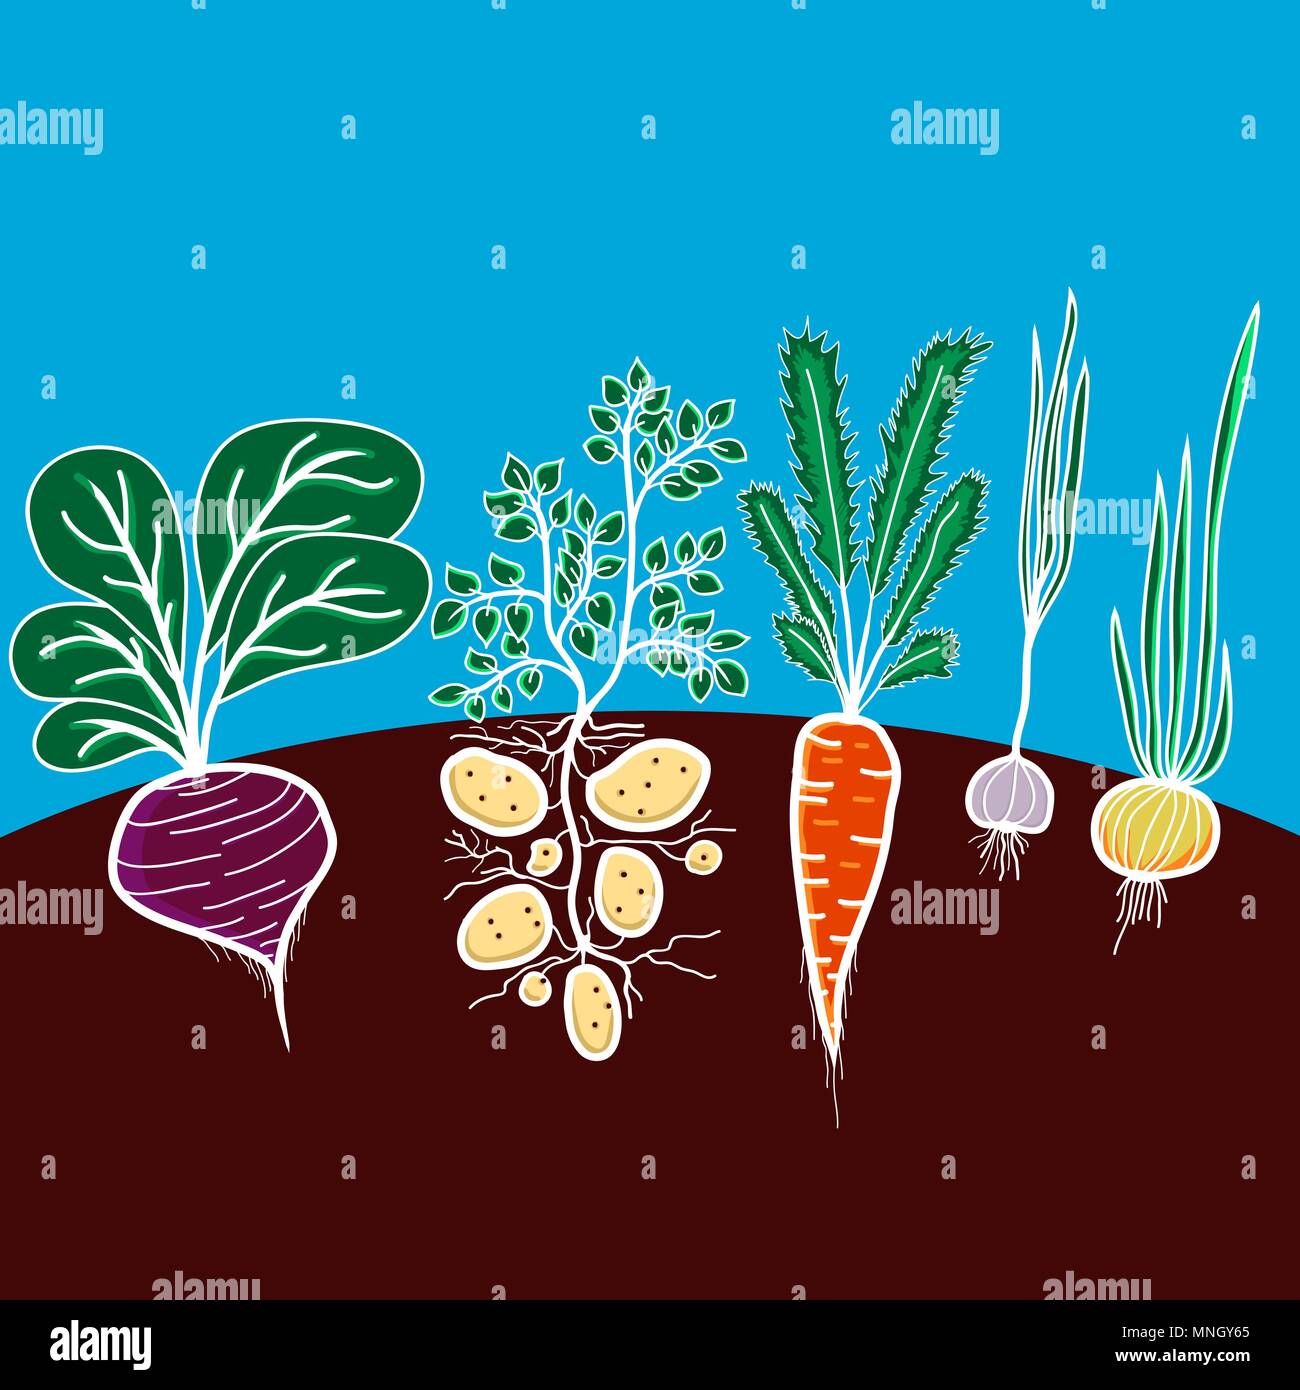 Illustration with growing vegetables - beetroot, potato, carrot, garlic and onion Stock Vector